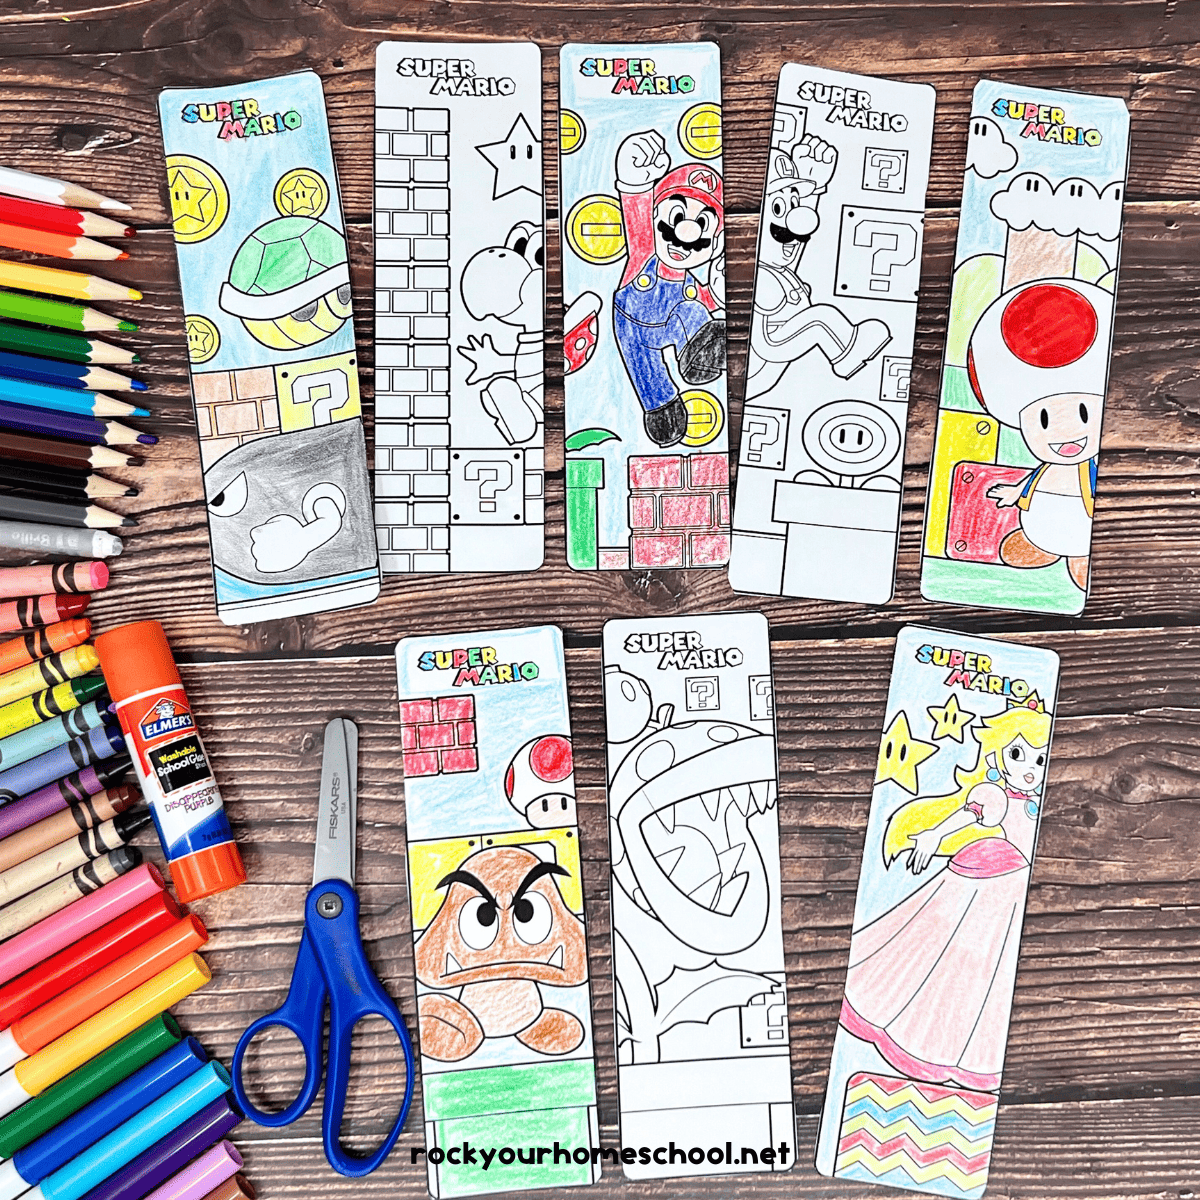 8 examples of Super Mario bookmarks to color featuring Mario, Luigi, Toad, Princess Peach, and more.